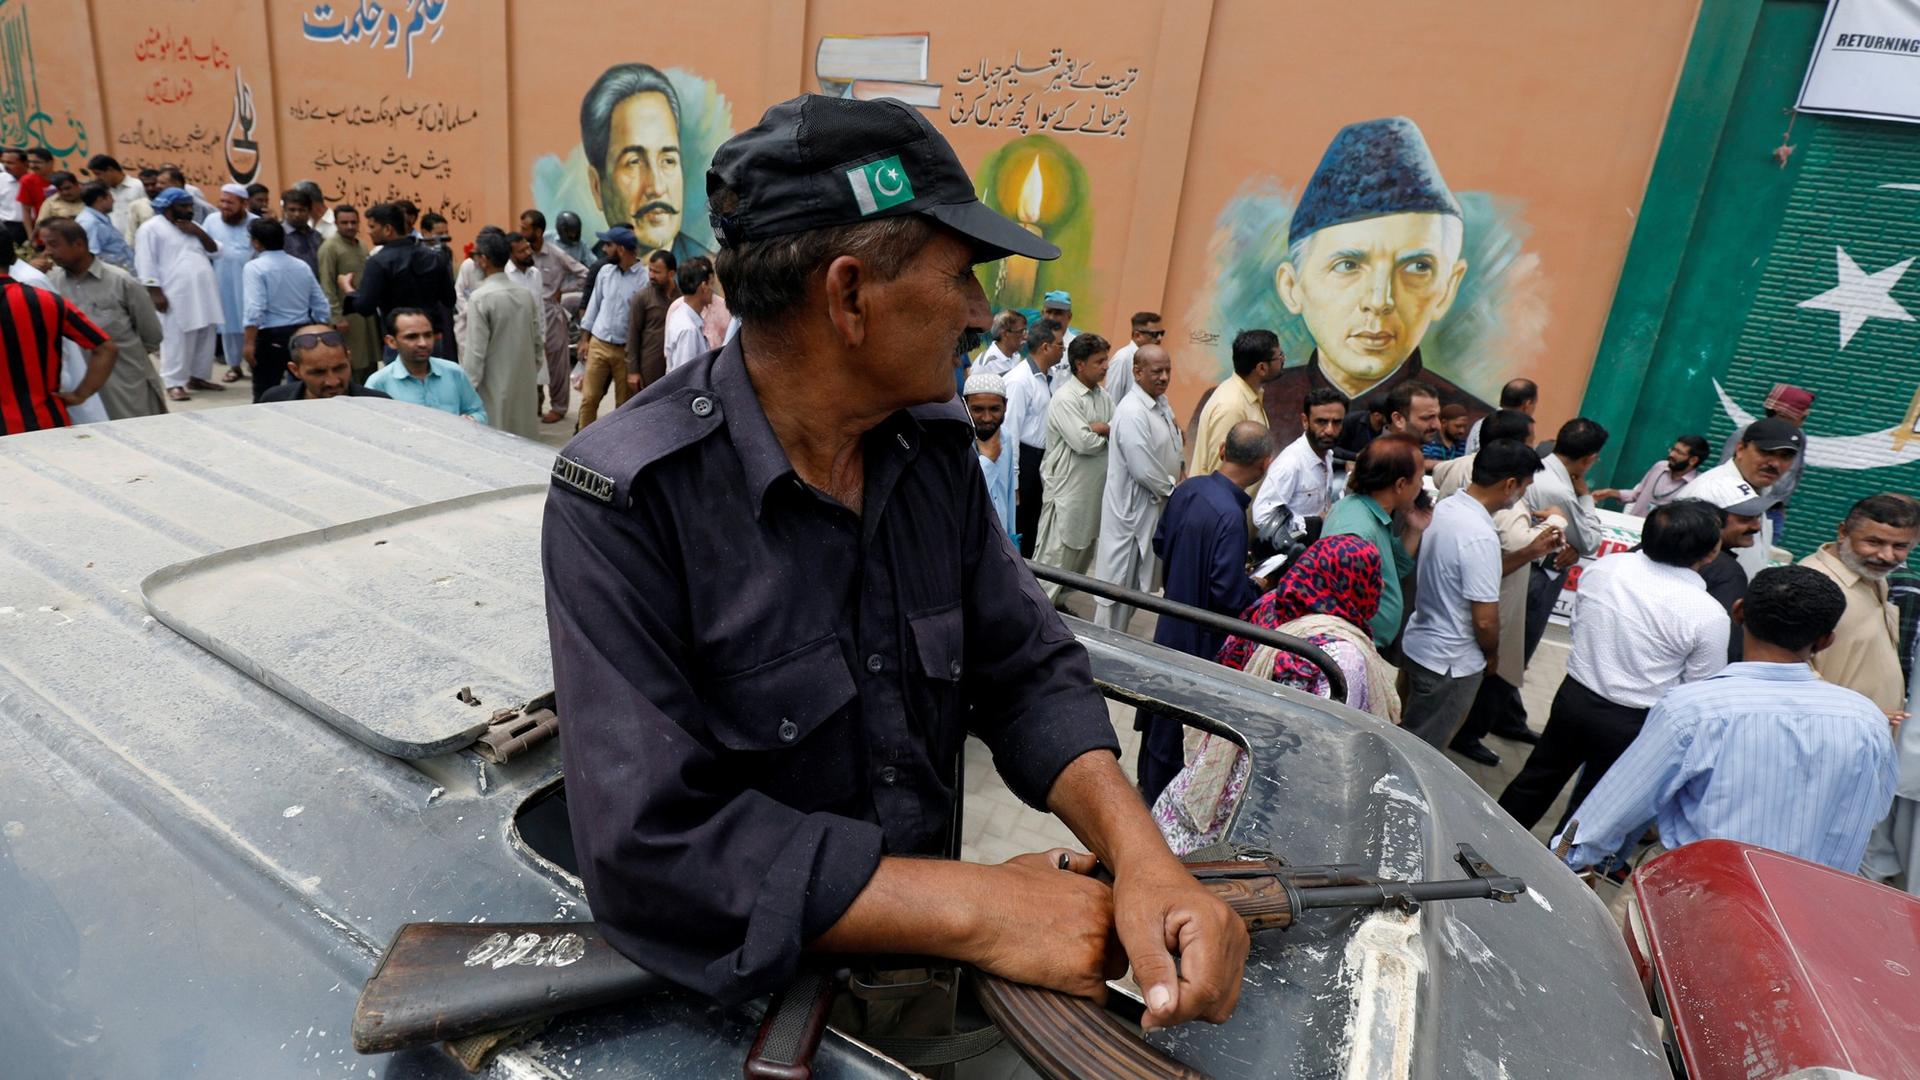 A security officer is seen perched through a vehicle's sun roof as electoral workers stand in line along a wall in Karachi, Pakistan.